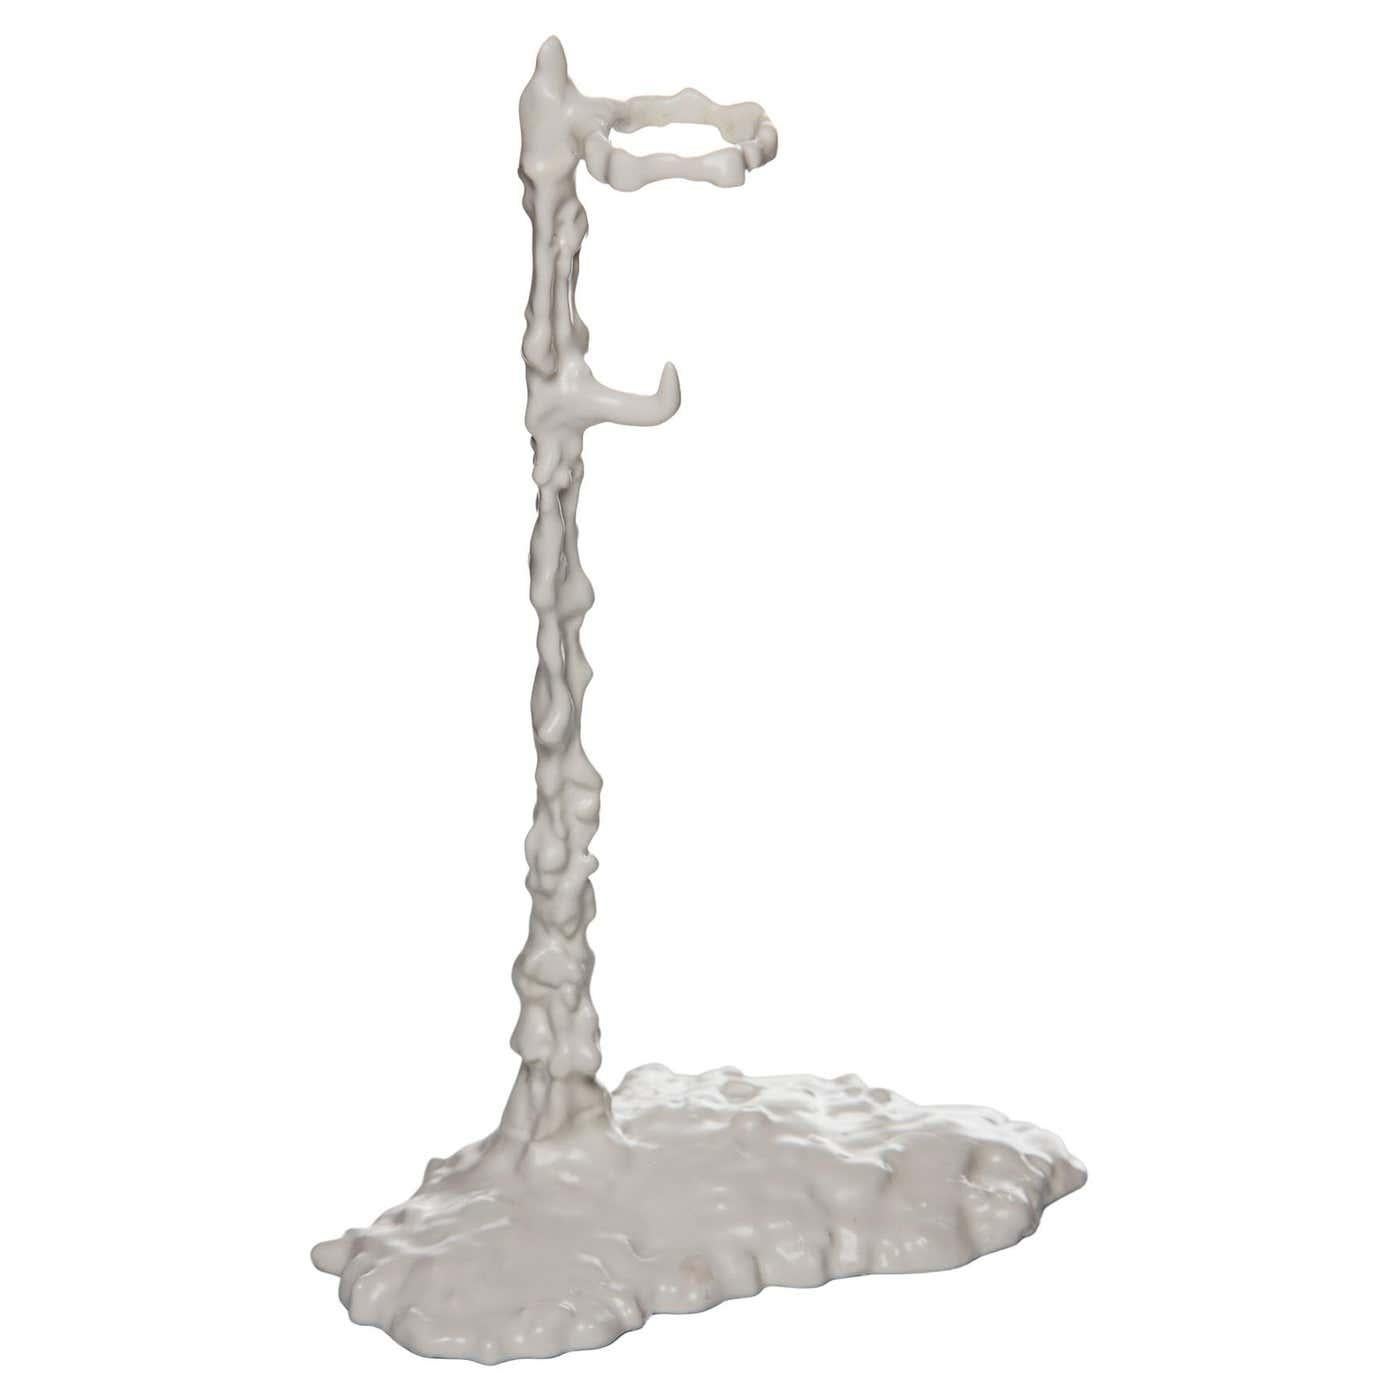 Alberto Low Candleholder designed by Oscar Tusquets.
Manufactured by Bd Barcelona (Spain).

Candleholder in cast brass finish.

Alberto designed by Oscar Tusquets for BD Barcelona is a candle holder made of matt white painted cast brass. Available